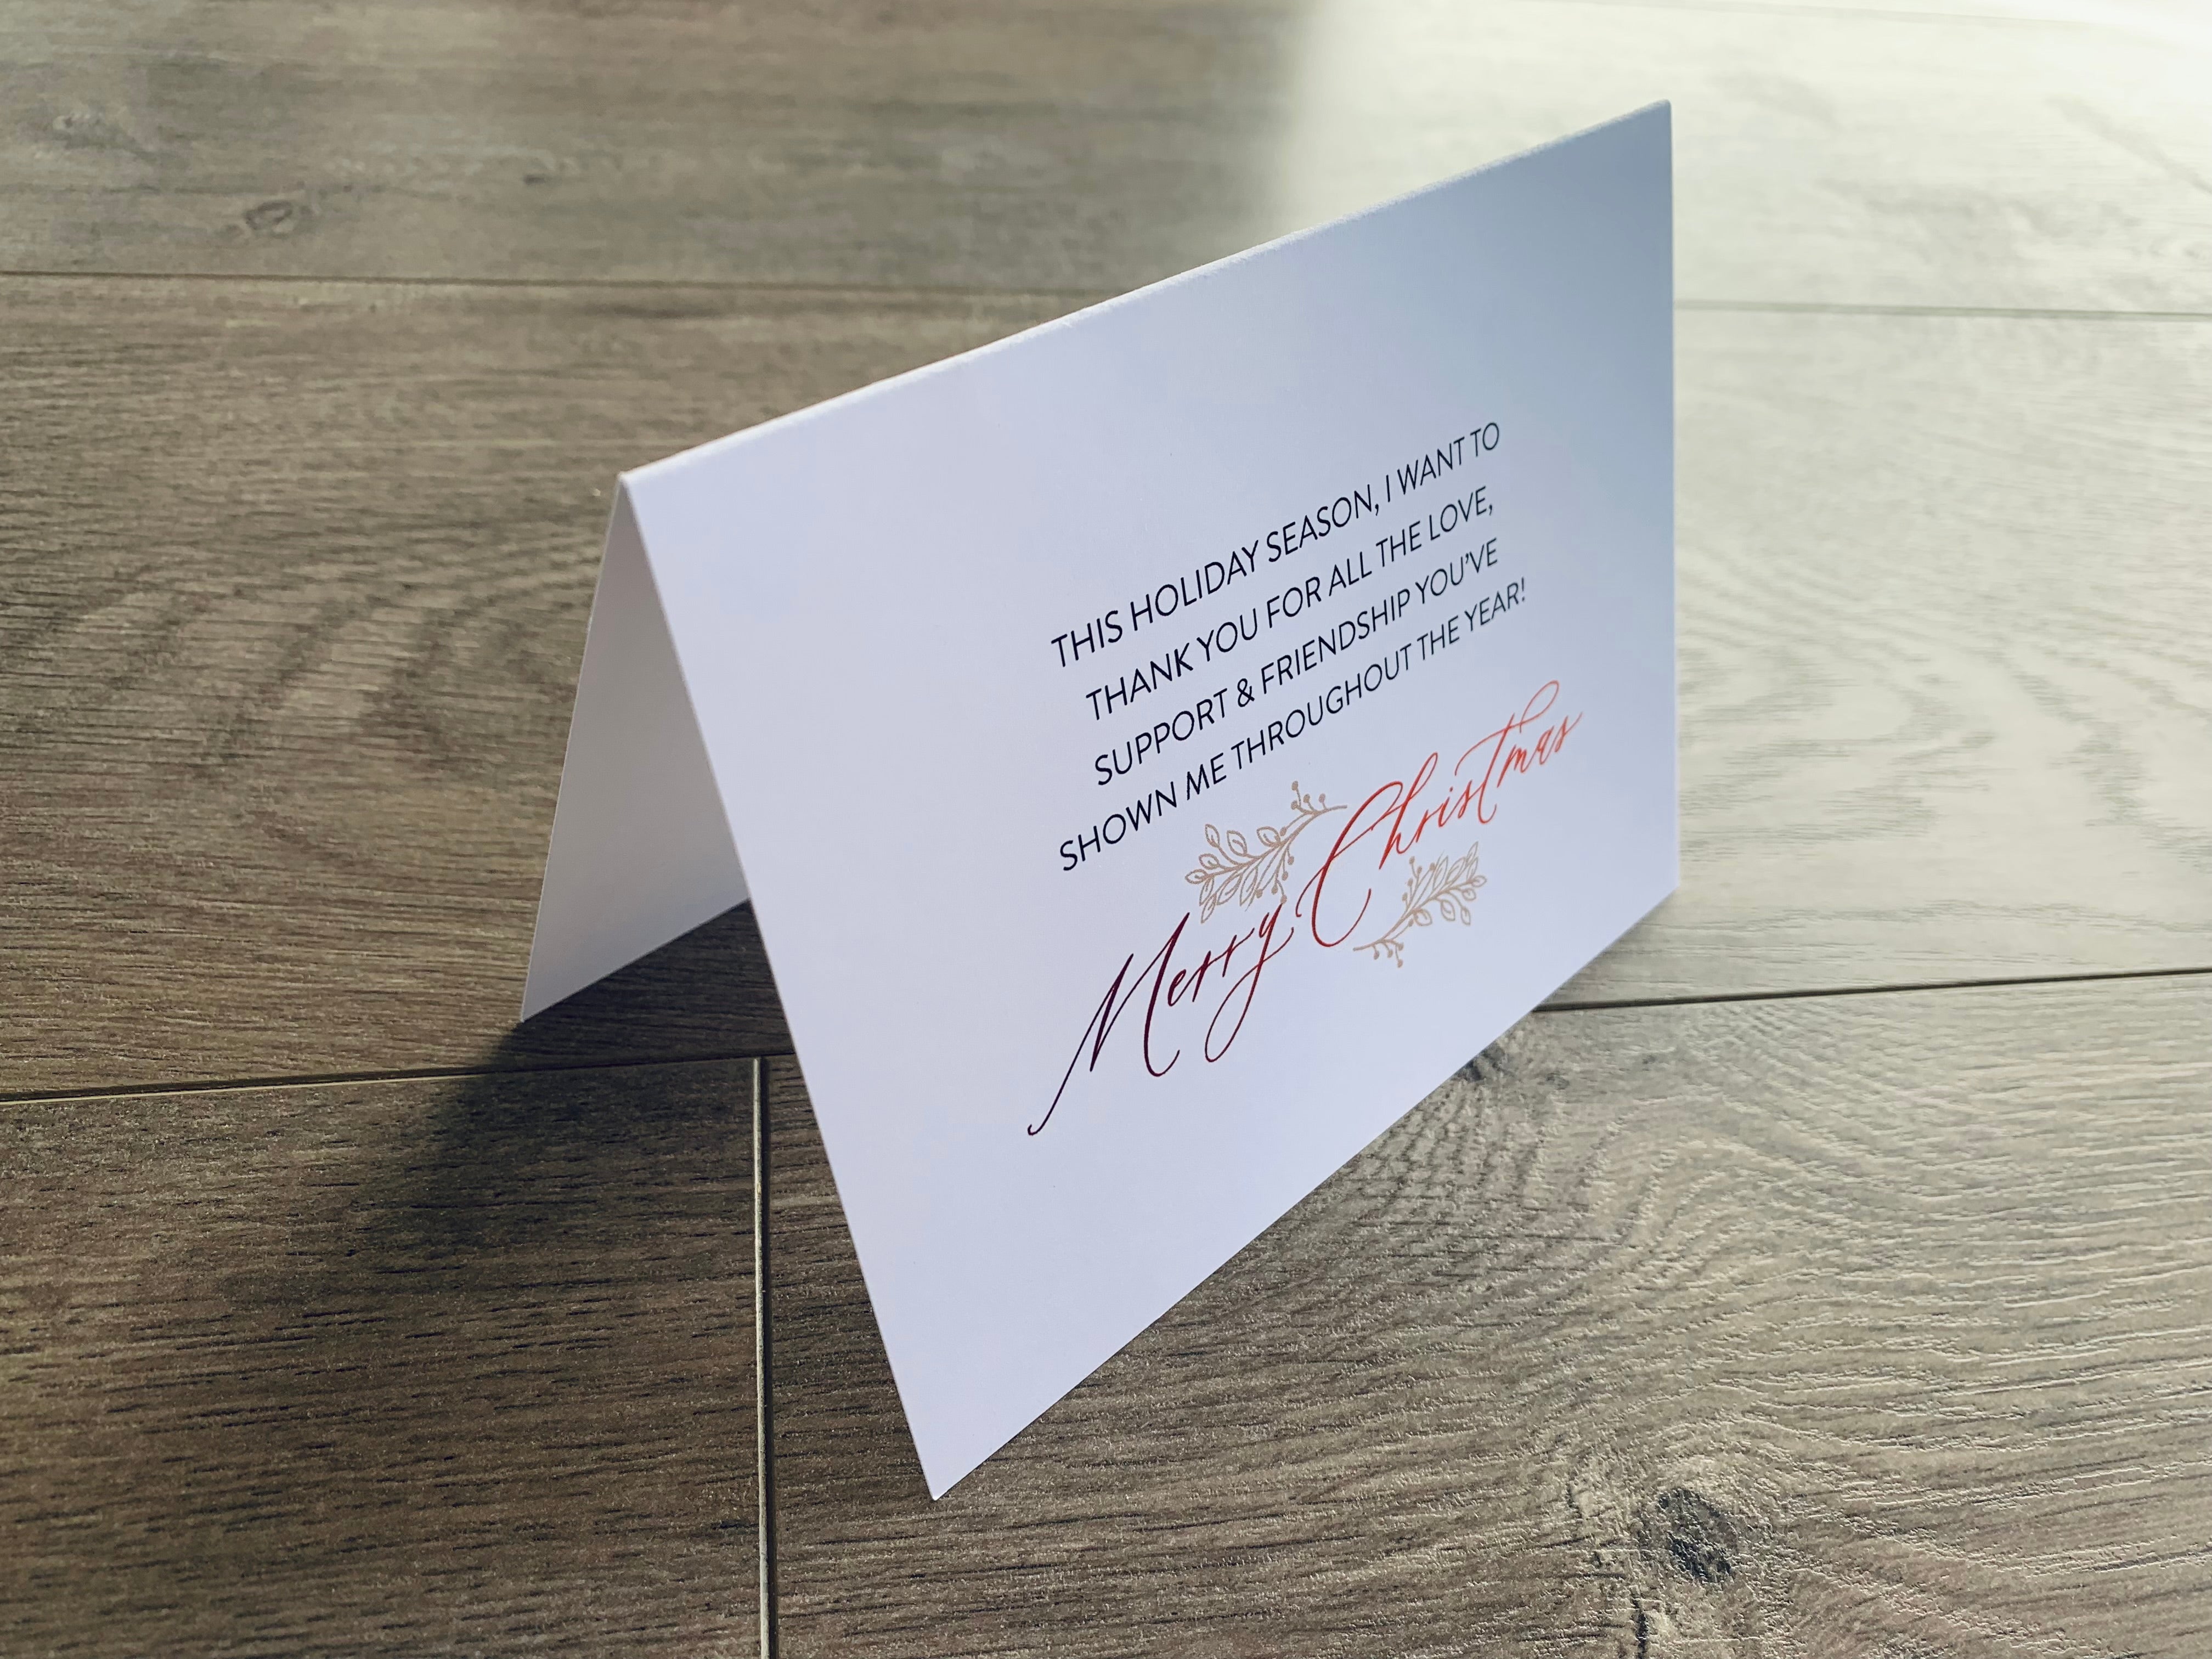 A white folded notecard sits on a wooden floor. On the front of the card, it reads, "This holiday season, I want to thank you for all the love, support & friendship you've shown me throughout the year! Merry Christmas!" Merry Thanks Collection by Stationare.